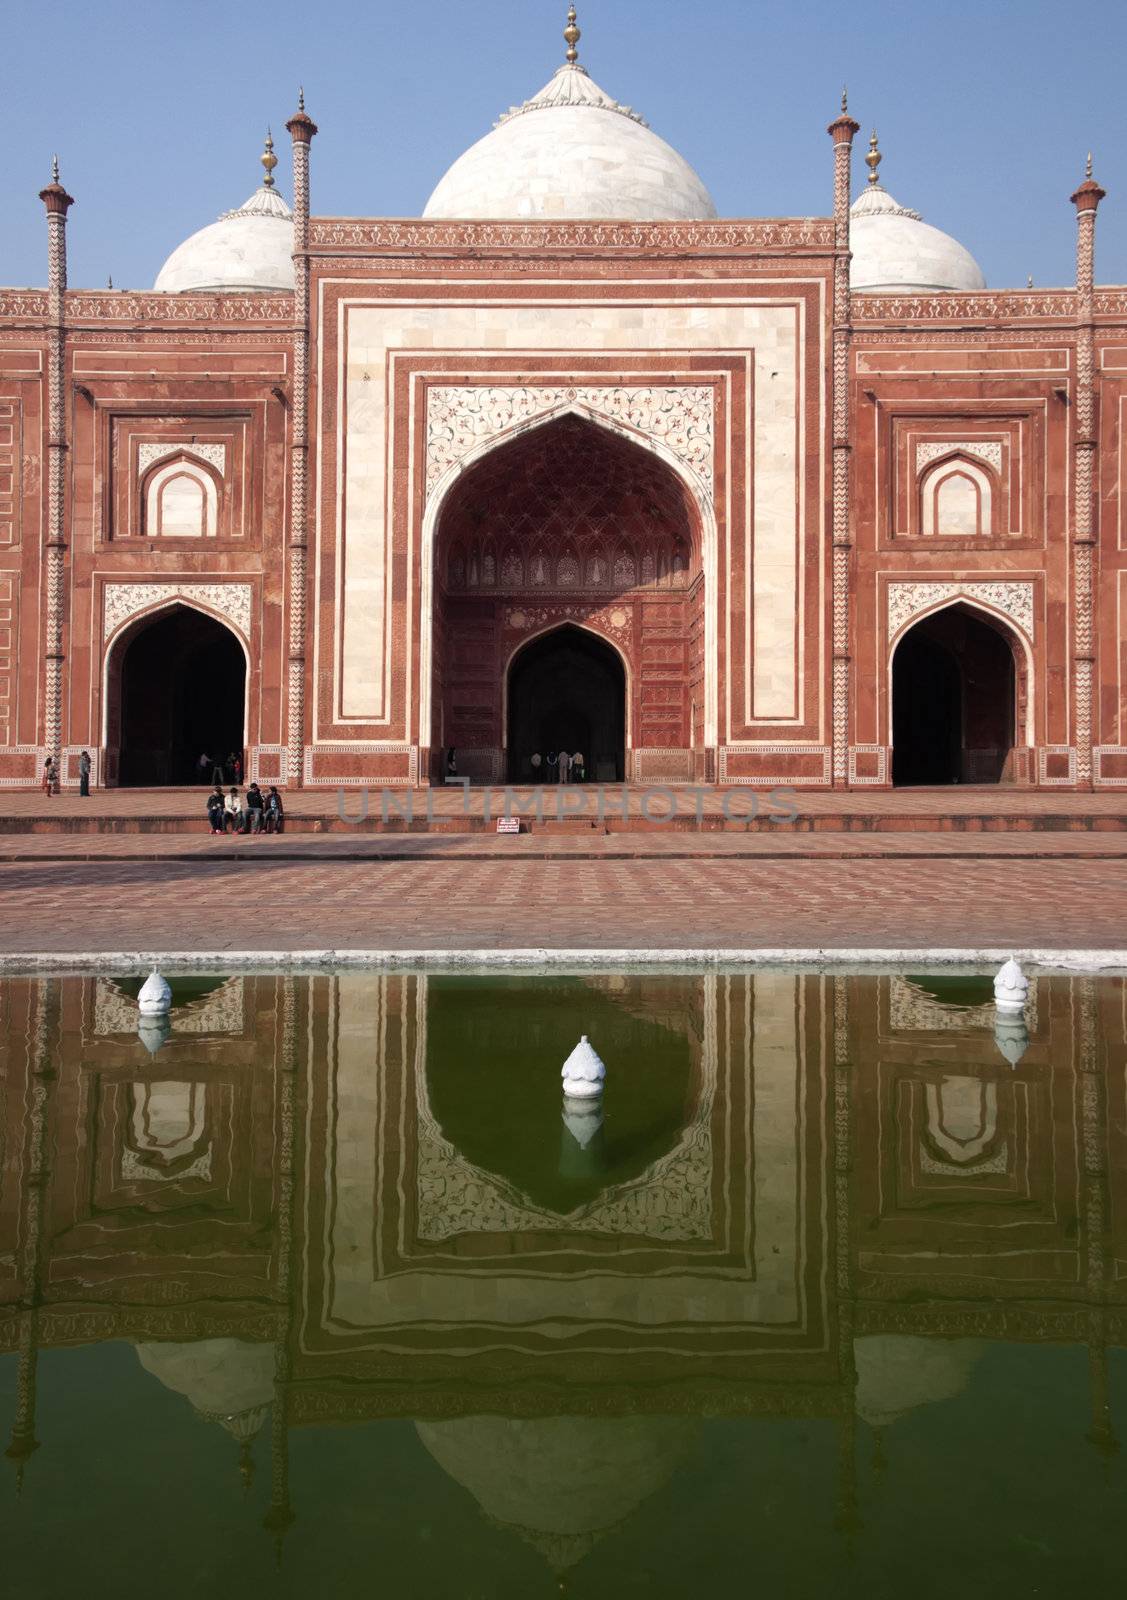 Reflection in pool plus mosque at Taj Mahal at India's Agra. by Claudine